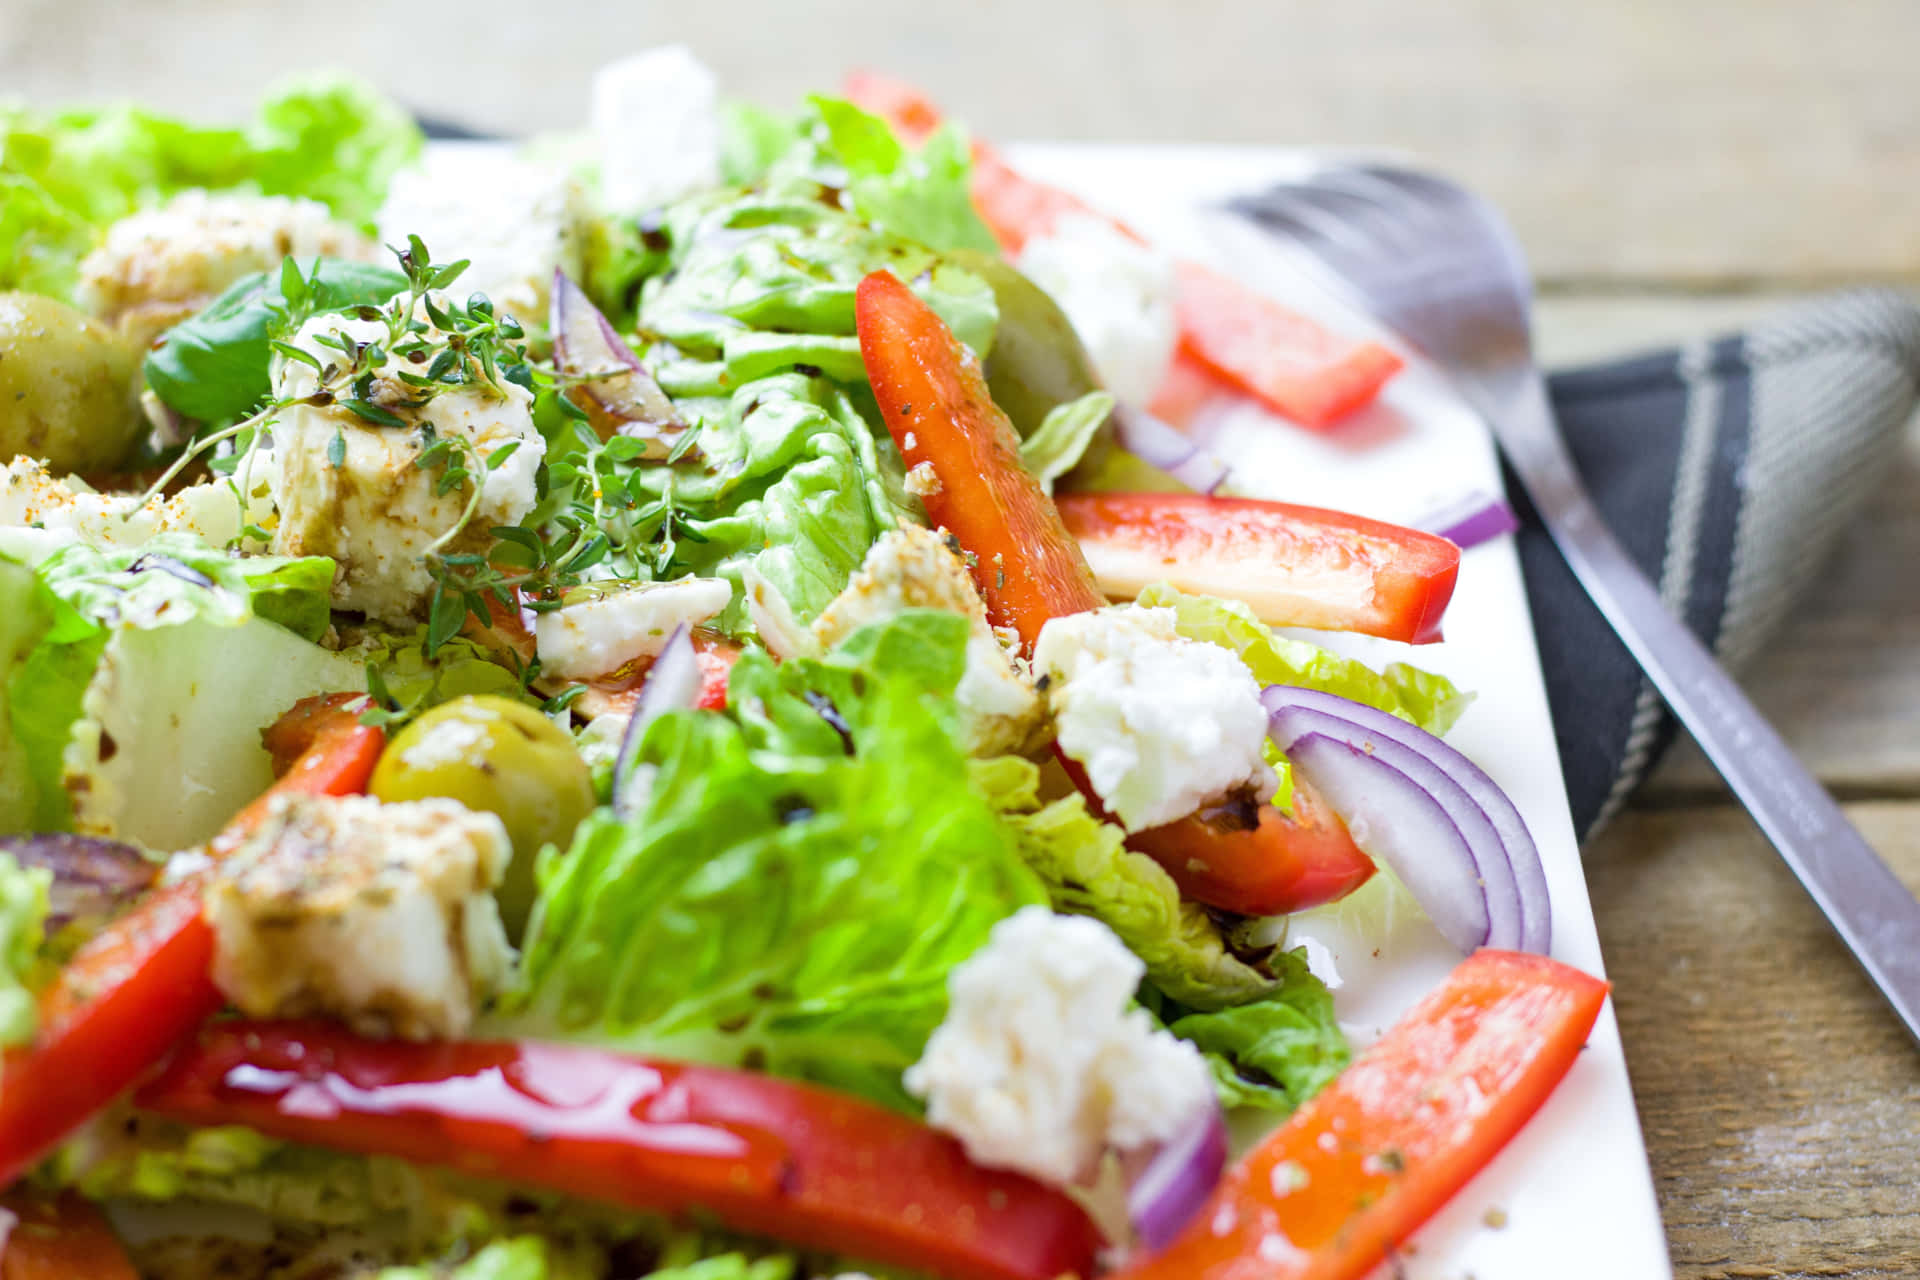 A delicious mix of greens, vegetables, and dressing for a healthy and full meal